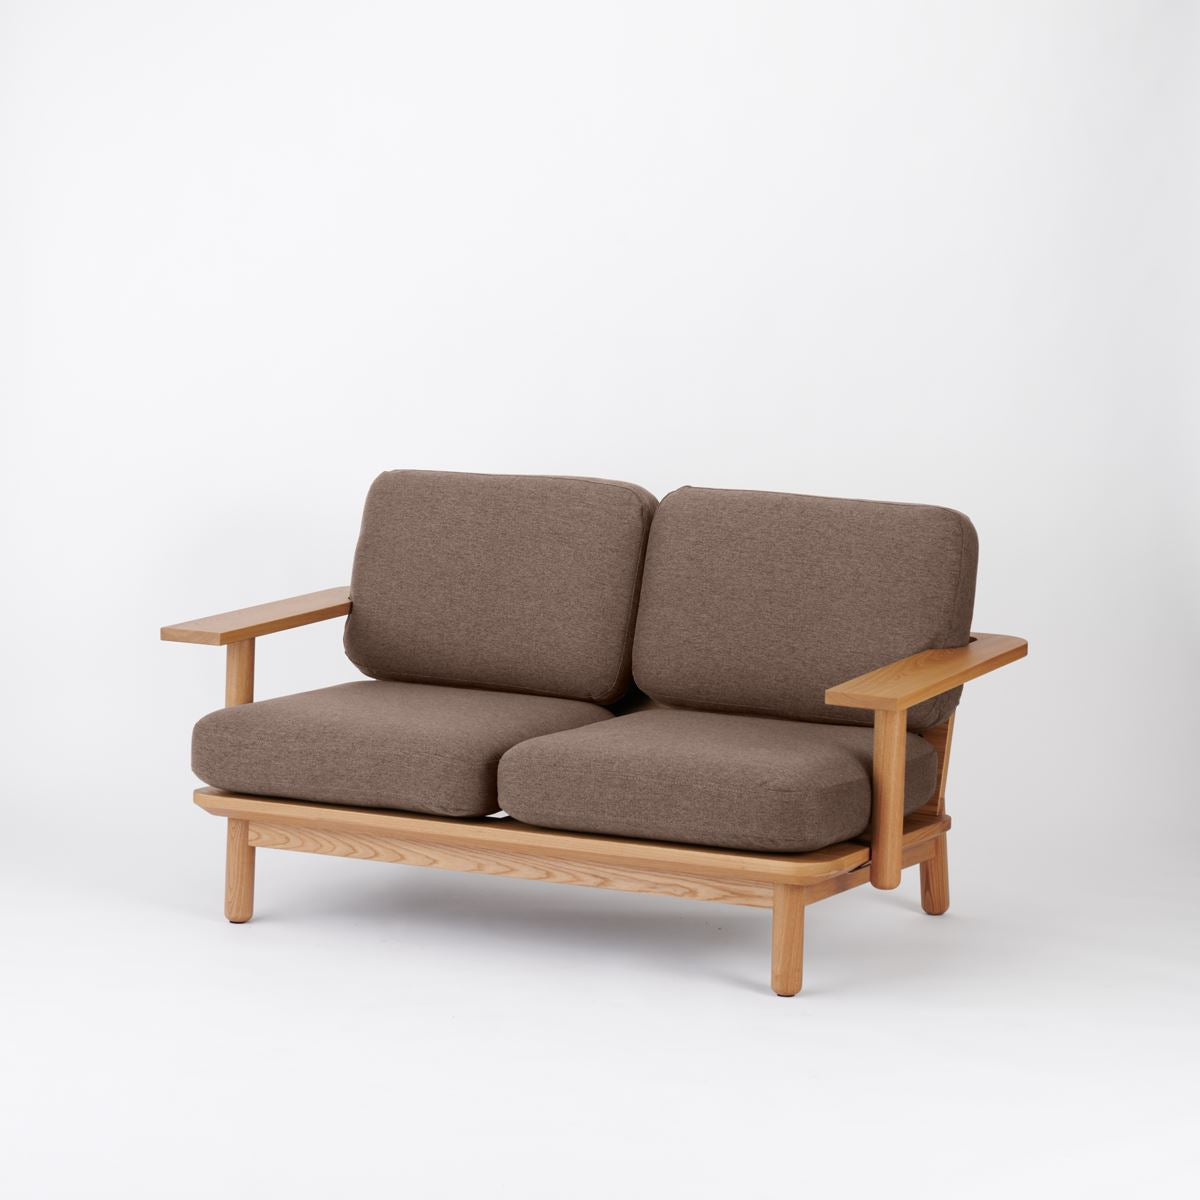 KUUM  Sofa 2 seater Double arm - Wooden Frame/Natural / クーム ソファ